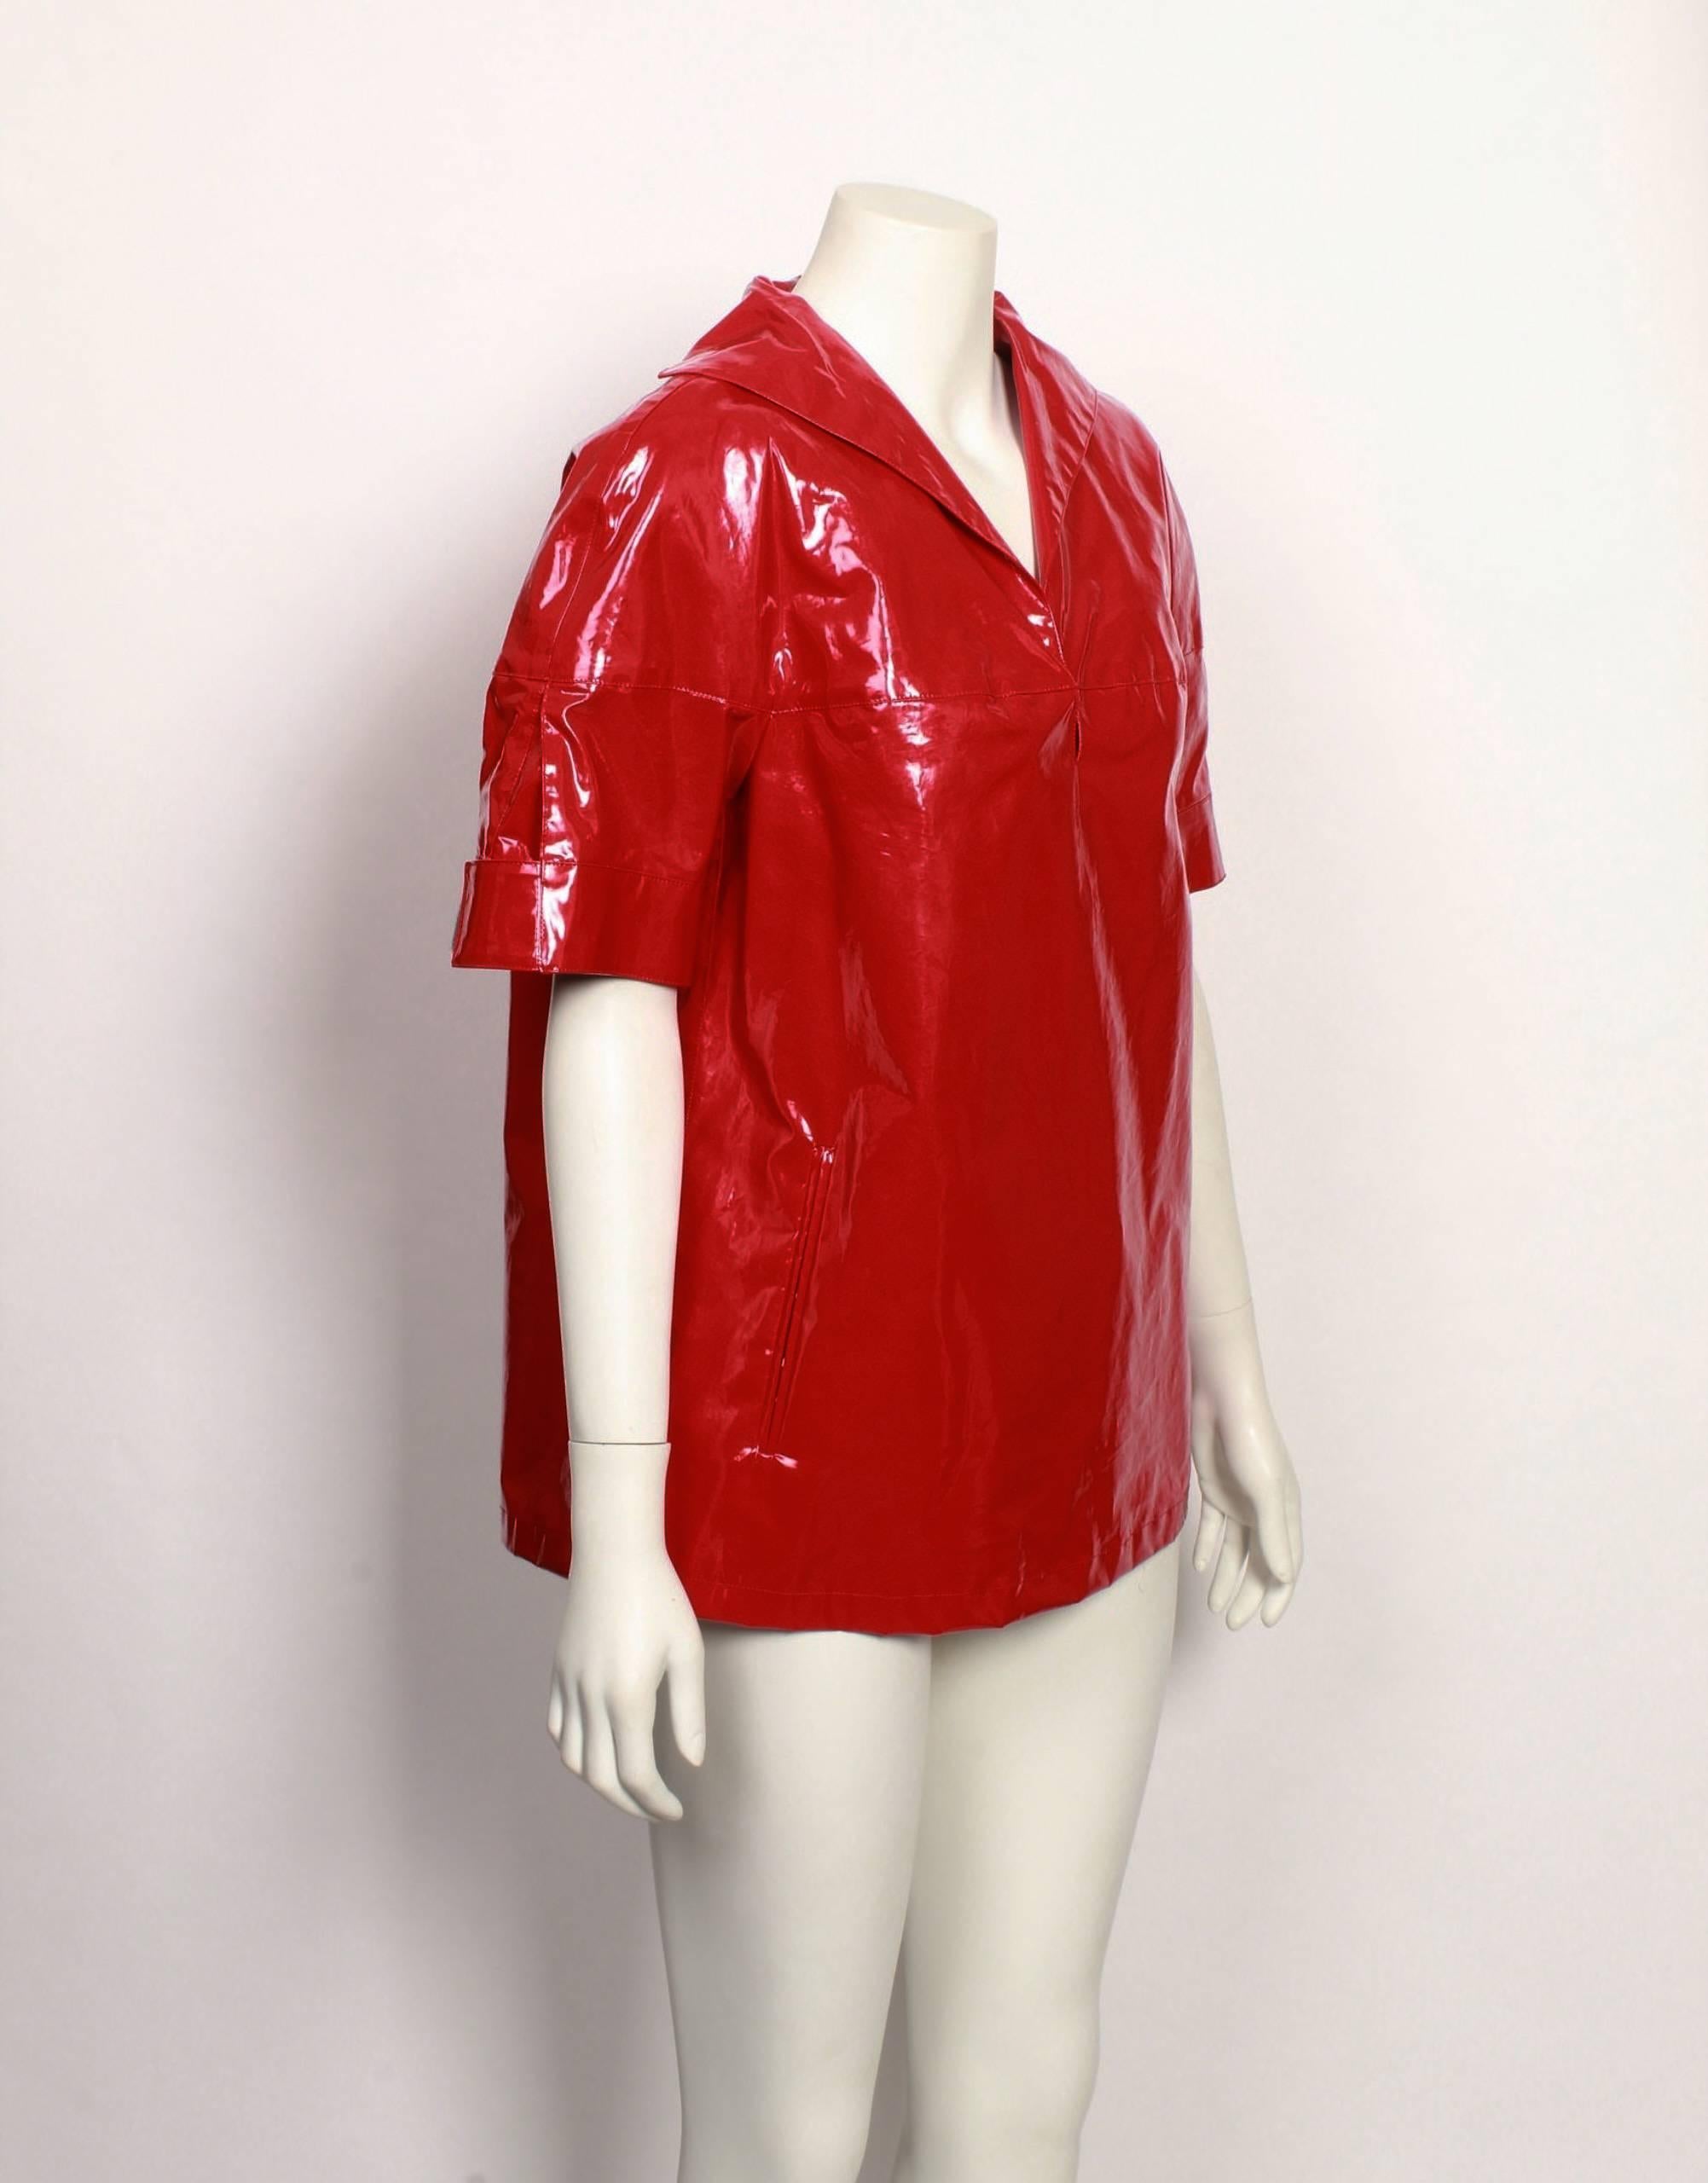 Prada futuristic bright red high shine cotton vinyl waterproof shell top with turn back collar, 2 front pockets and adjustable sleeves with velcro tabs.  This item has never been worn. Original tags still attached.
Made in Italy. Size 40.
Classic